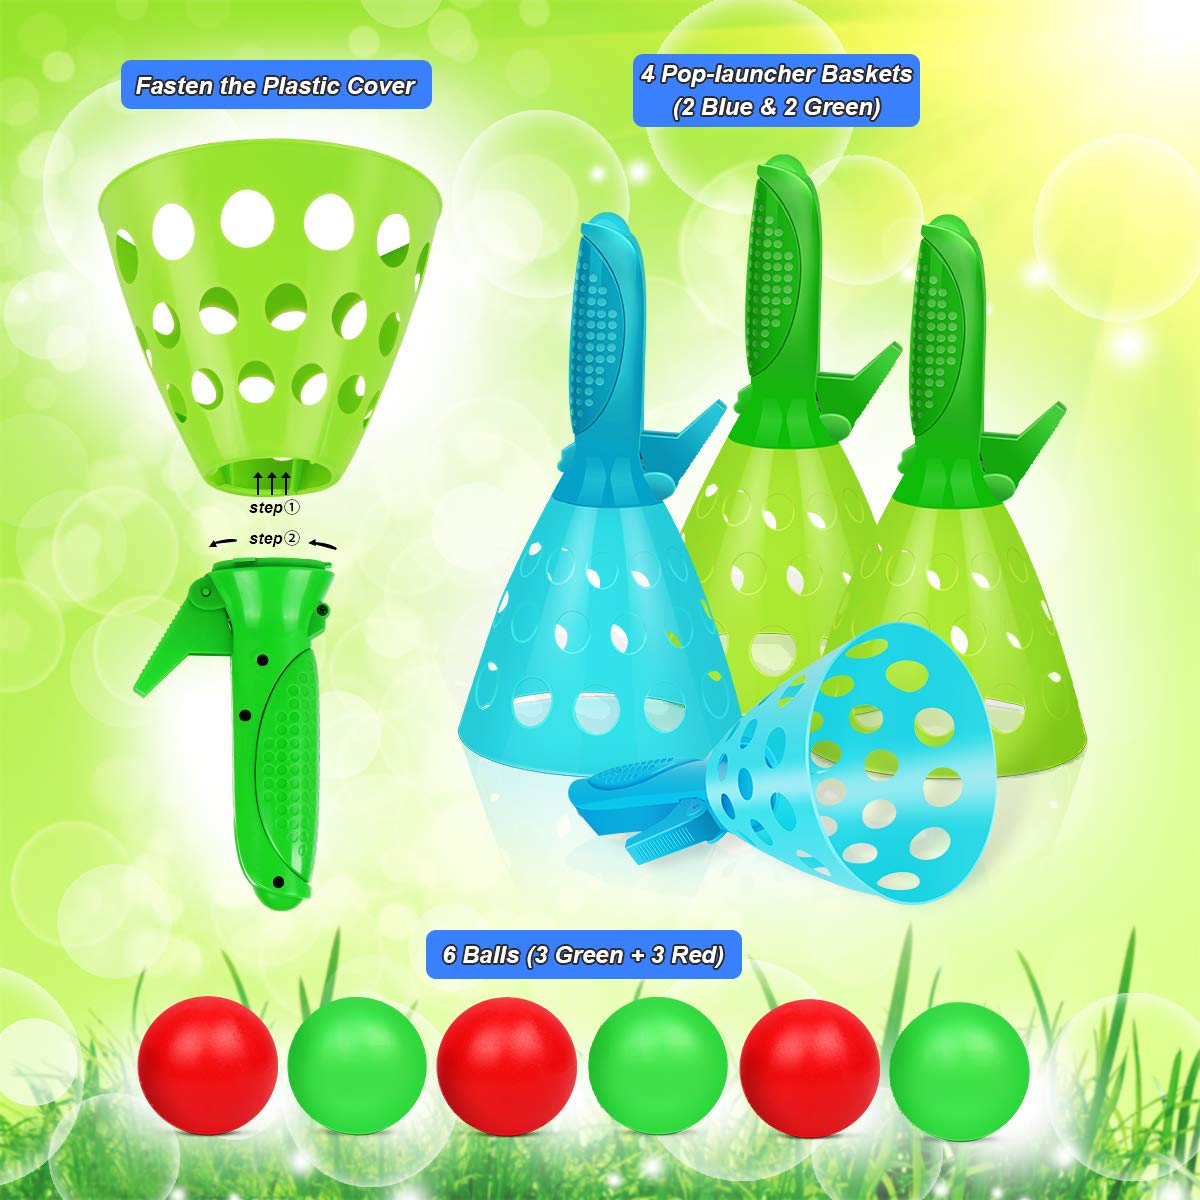 Duckura Outdoor Indoor Game Activities for Kids, Pop-Pass-Catch Ball Game with 4 Catch Launcher Baskets and 6 Balls, Christmas Party Favors Gifts Toys for Kids Age 5 6 7 8 9 10+ and Adults